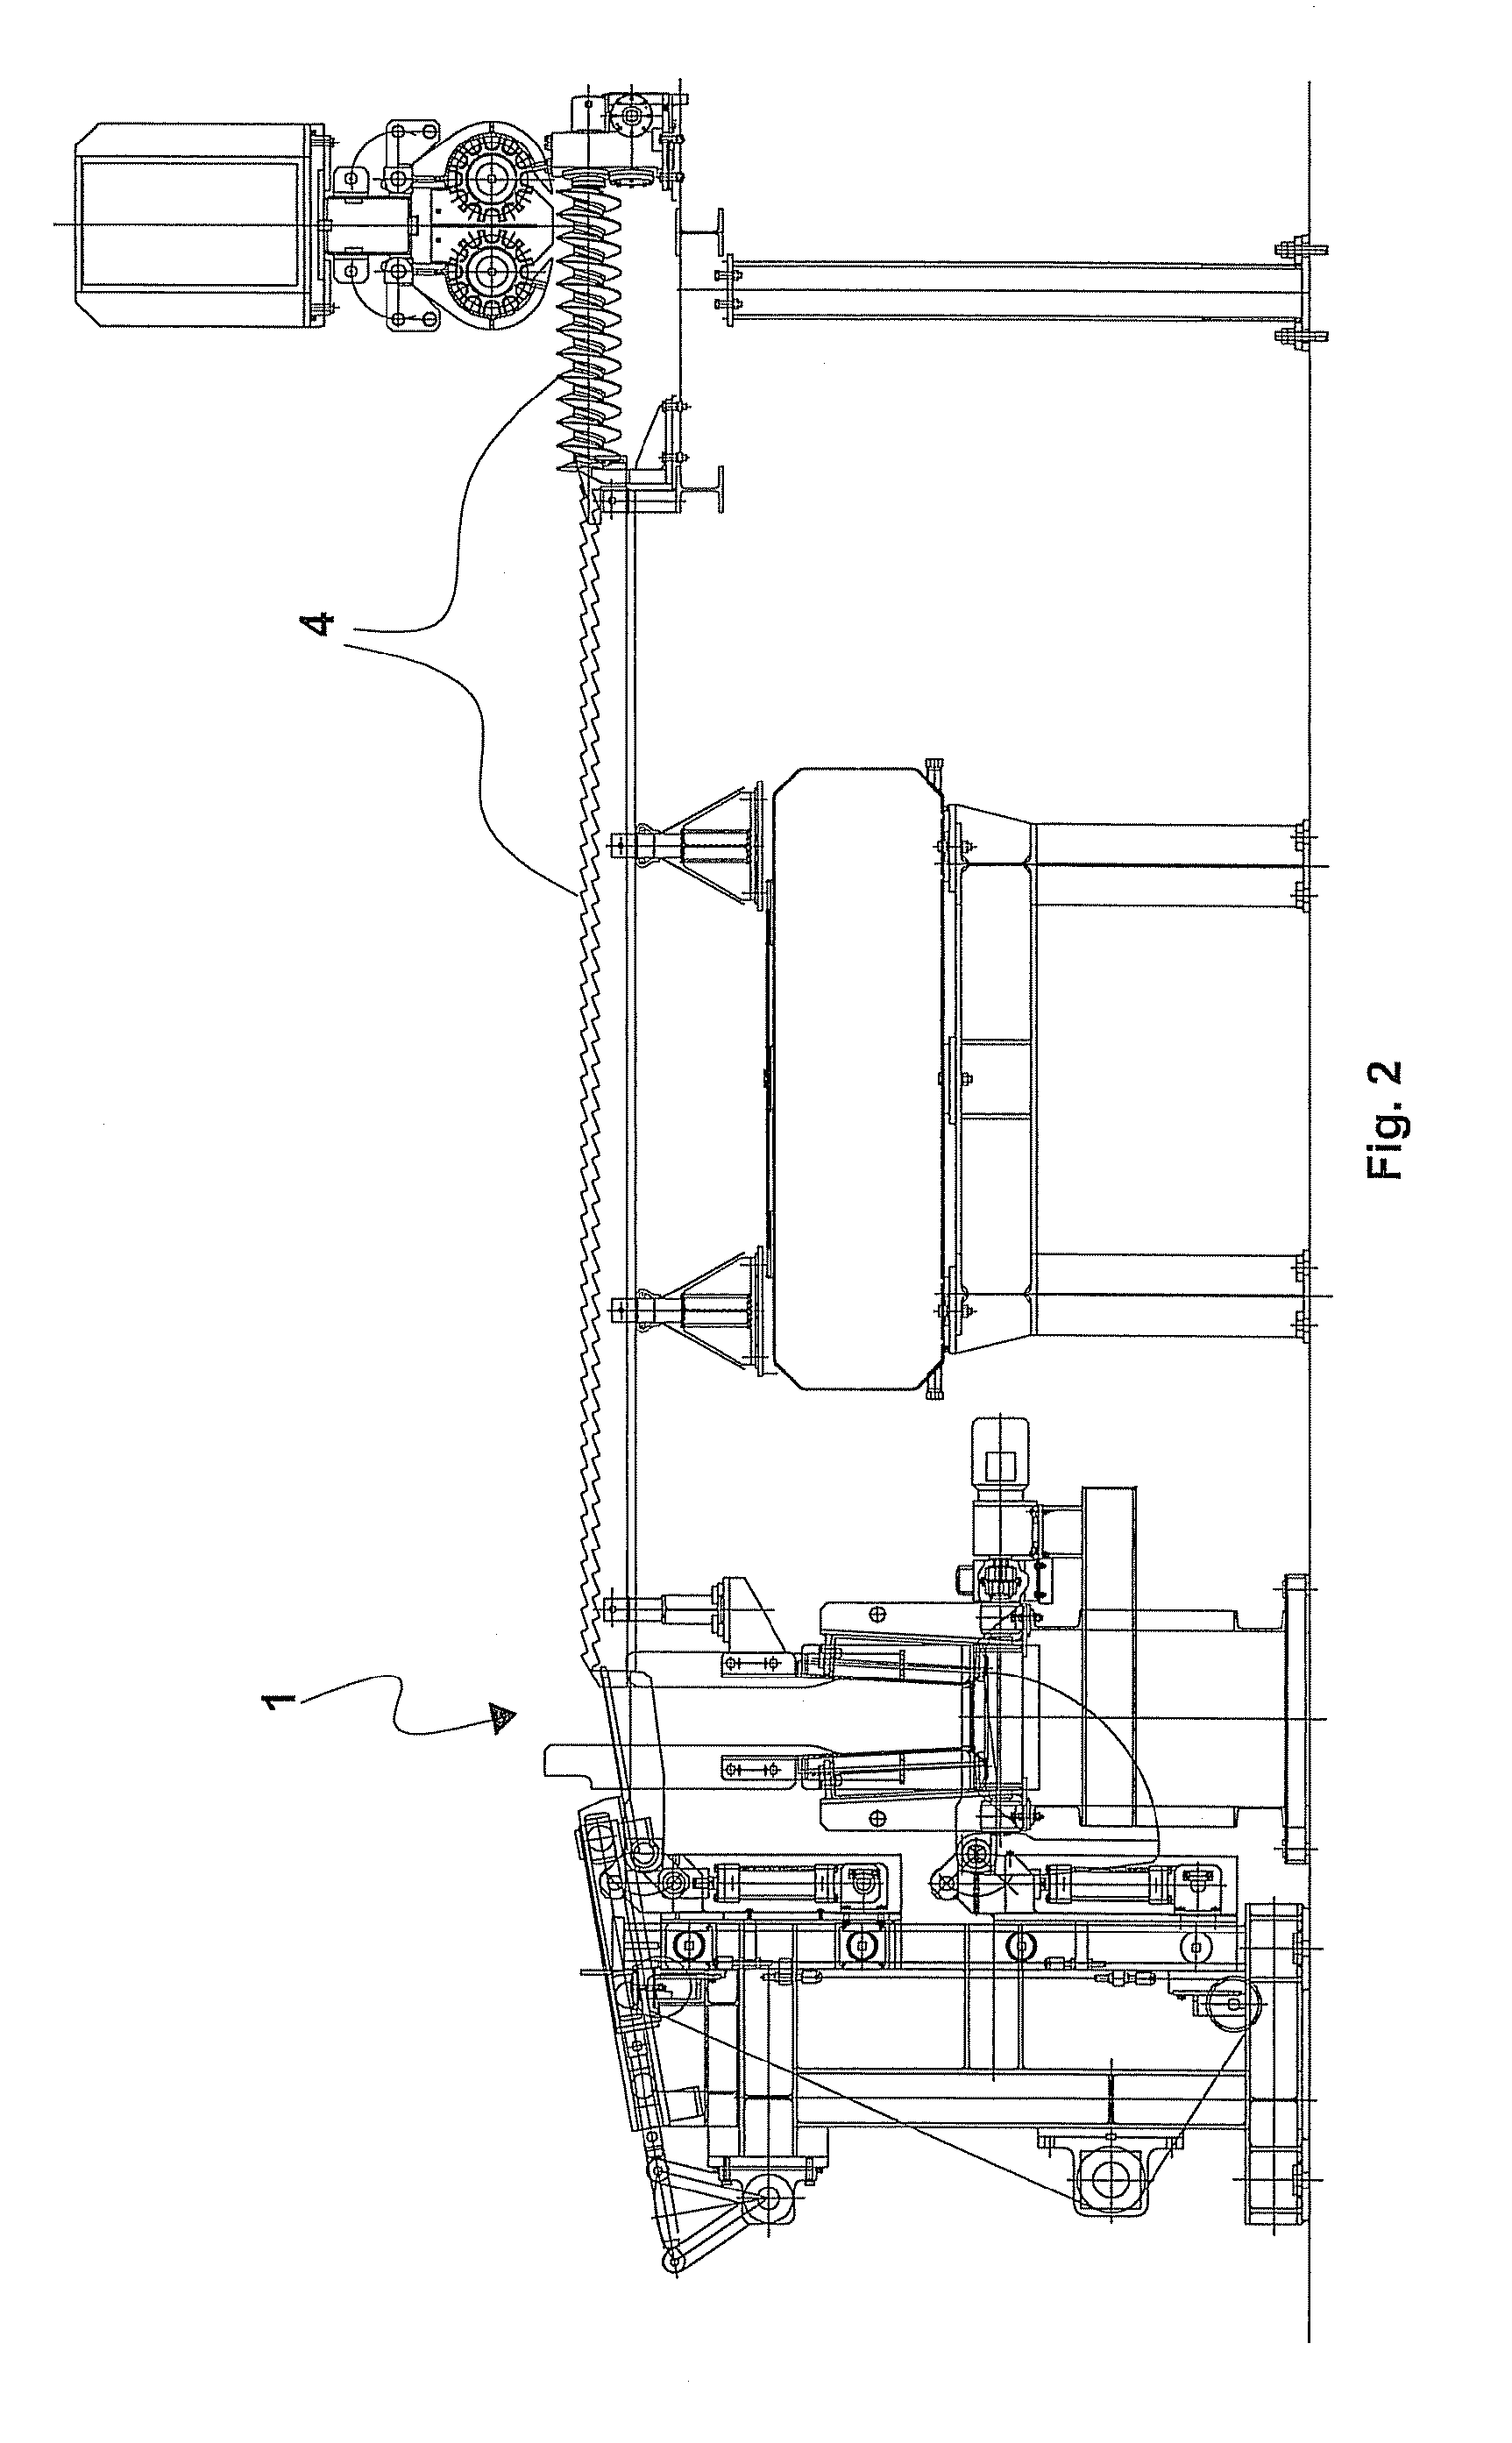 Device and process for forming rolled bar bundles